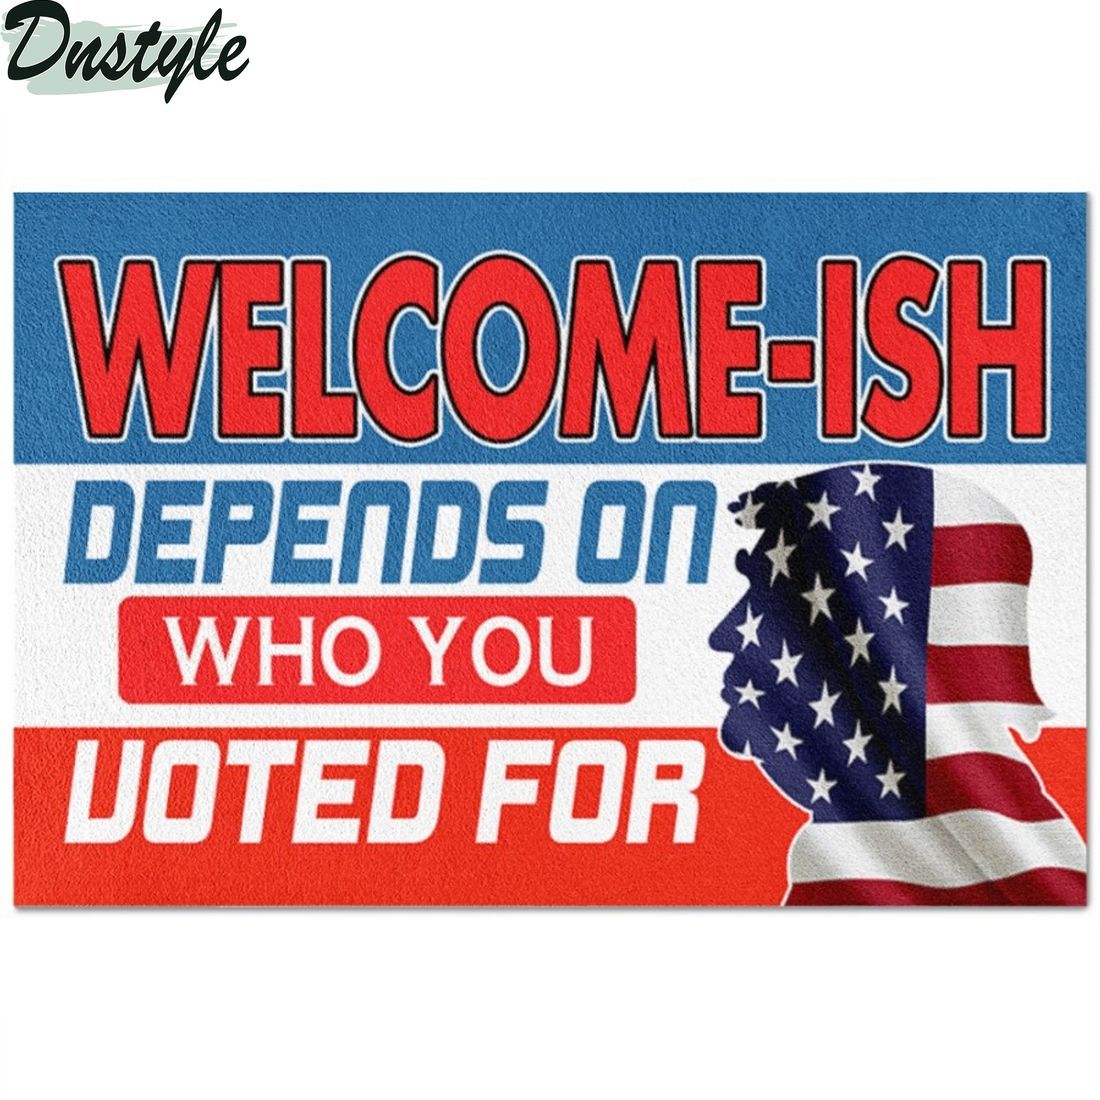 Depends on who you voted for Welcome-ish doormat